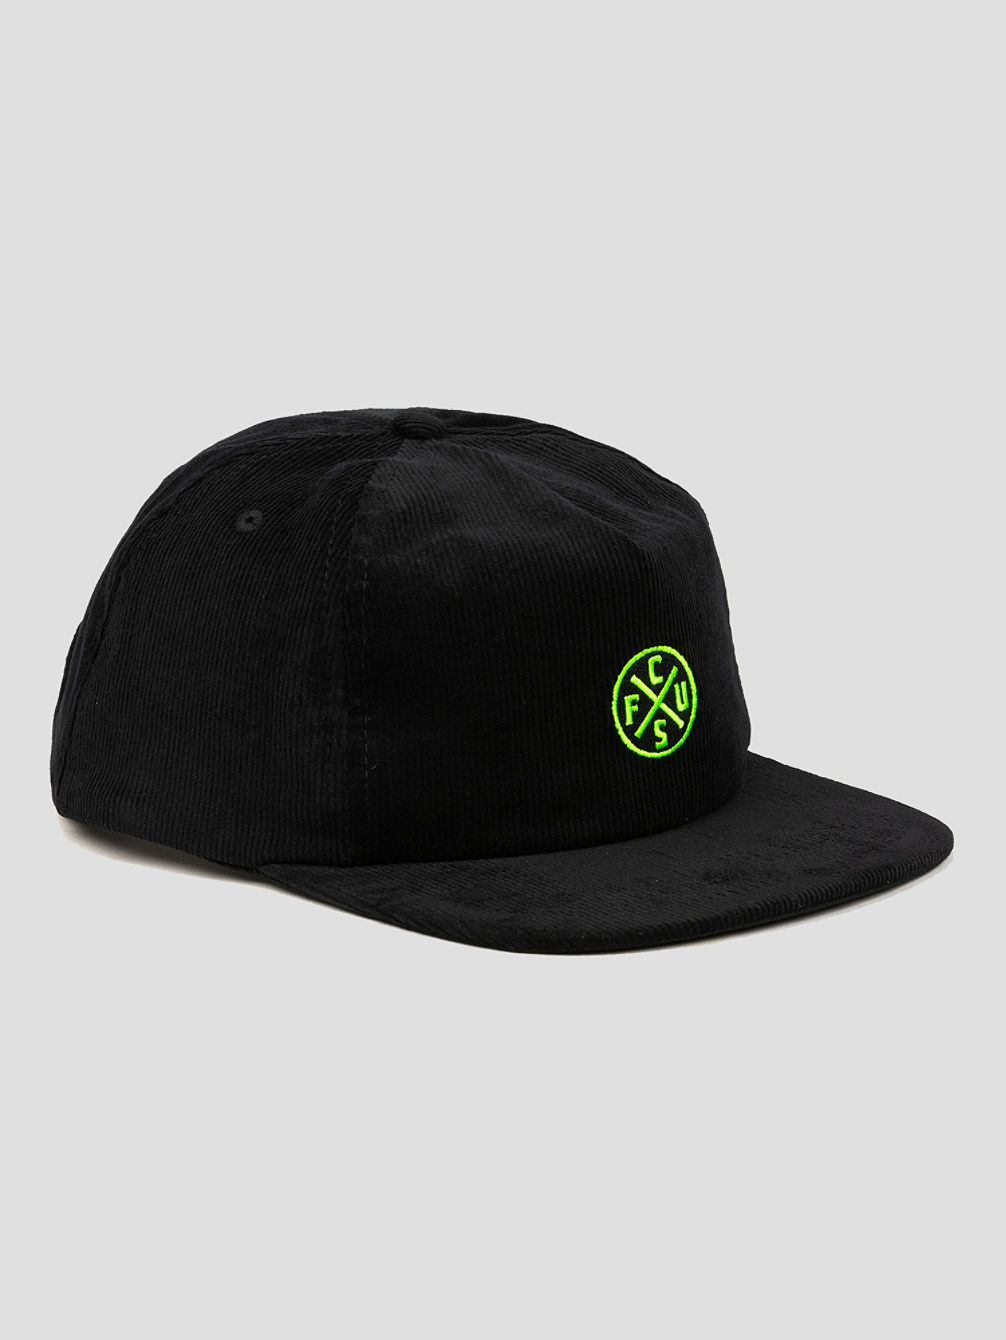 Contrast Snapback Mid Casquette